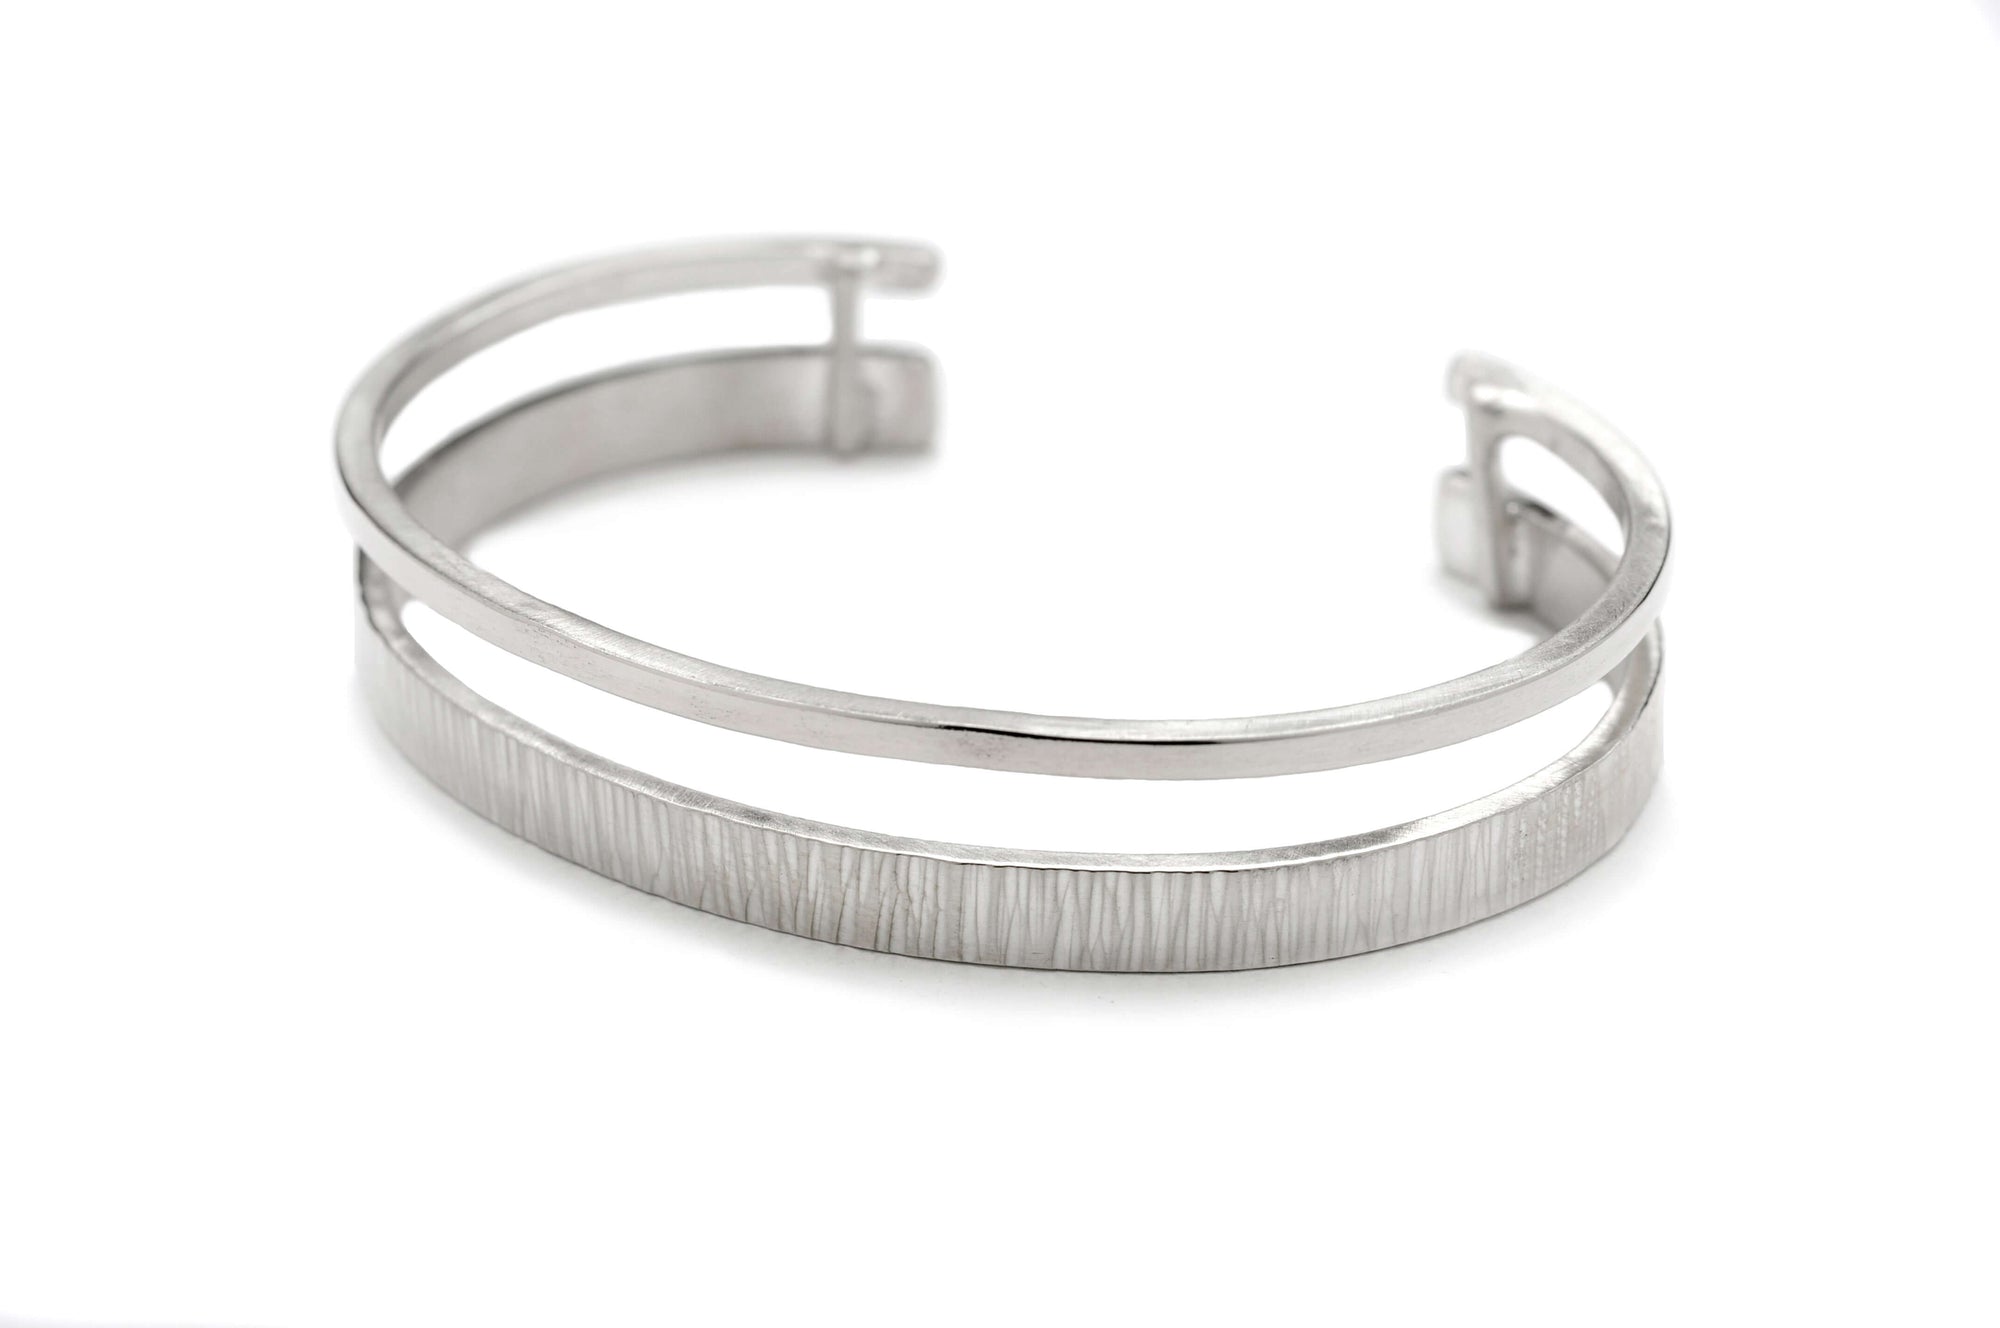 A sterling silver hammered cuff bracelet